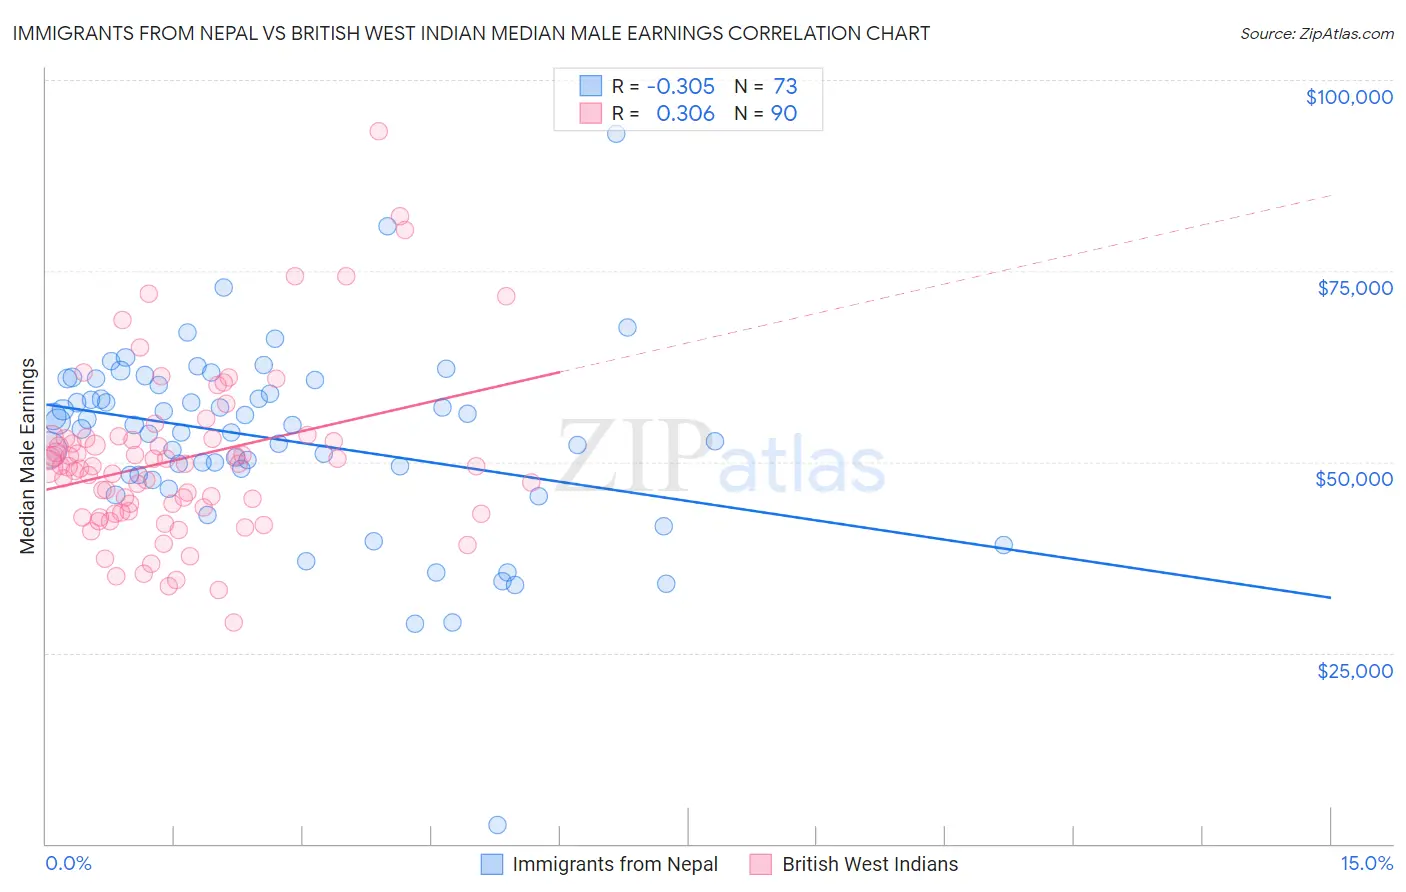 Immigrants from Nepal vs British West Indian Median Male Earnings